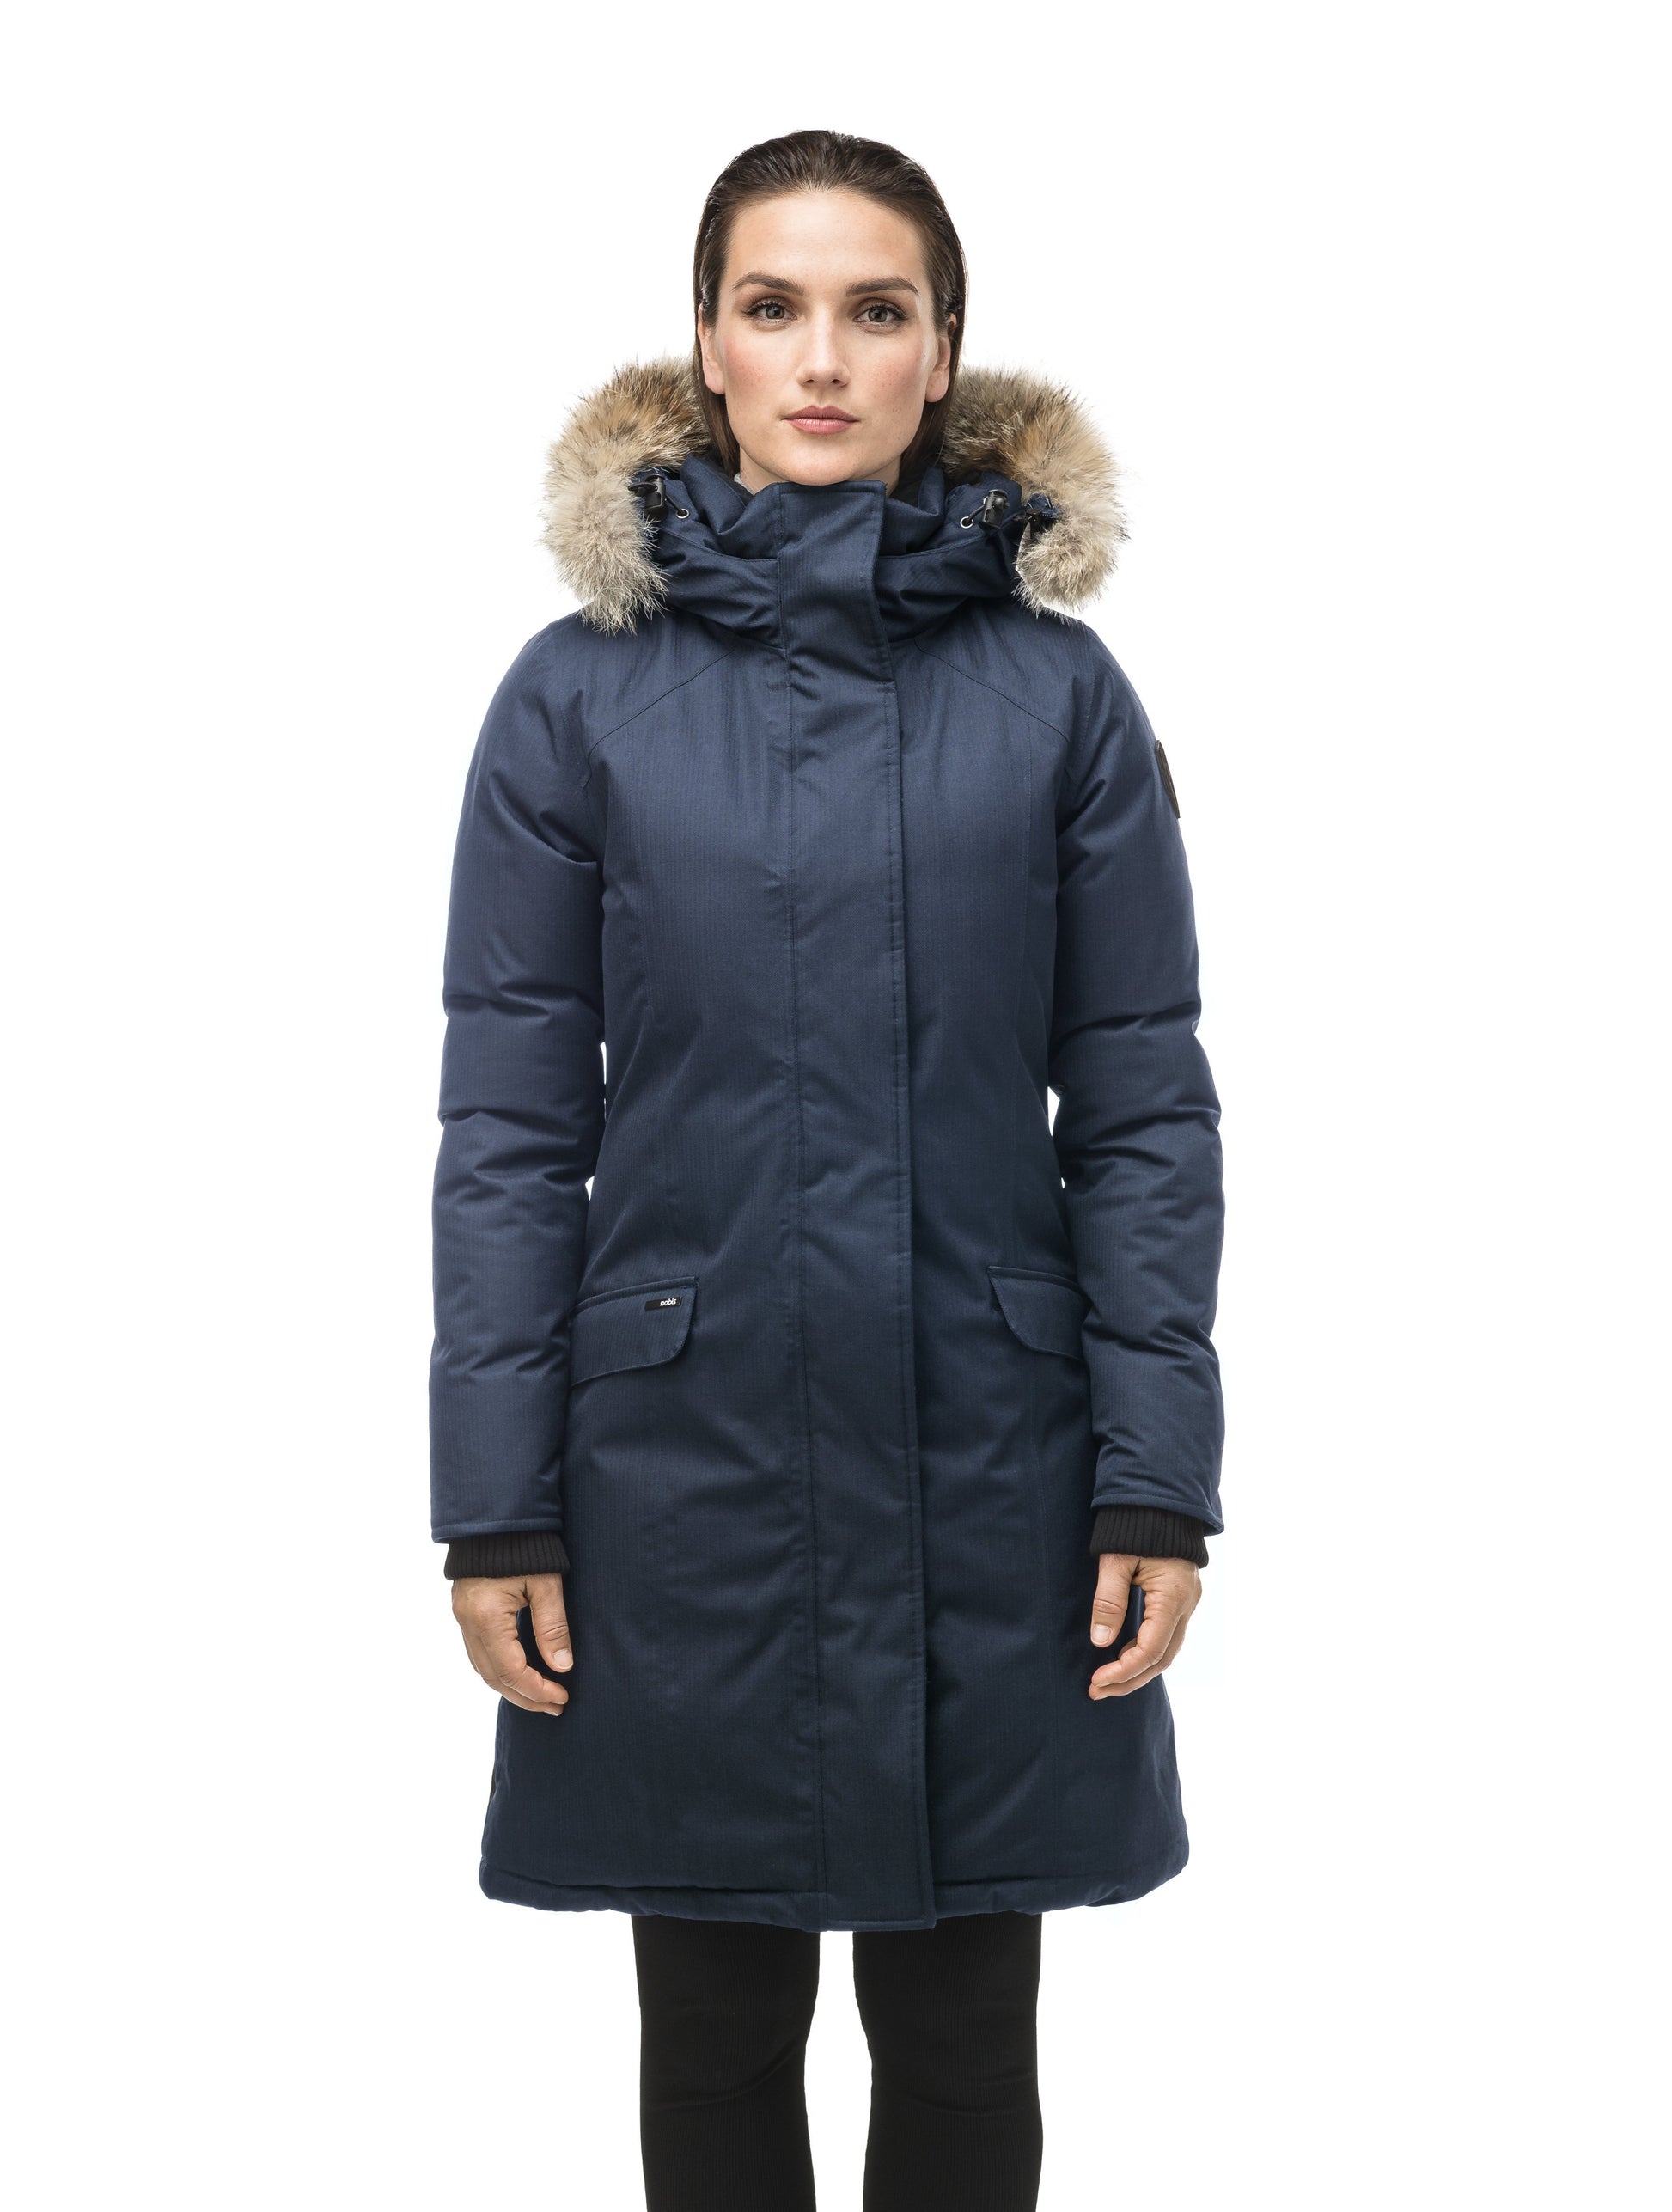 Rebecca Women's Parka in knee length, Canadian duck down insulation, two-way zipper with magnetic front placket, non-removable hood with removable coyote fur trim, in Navy